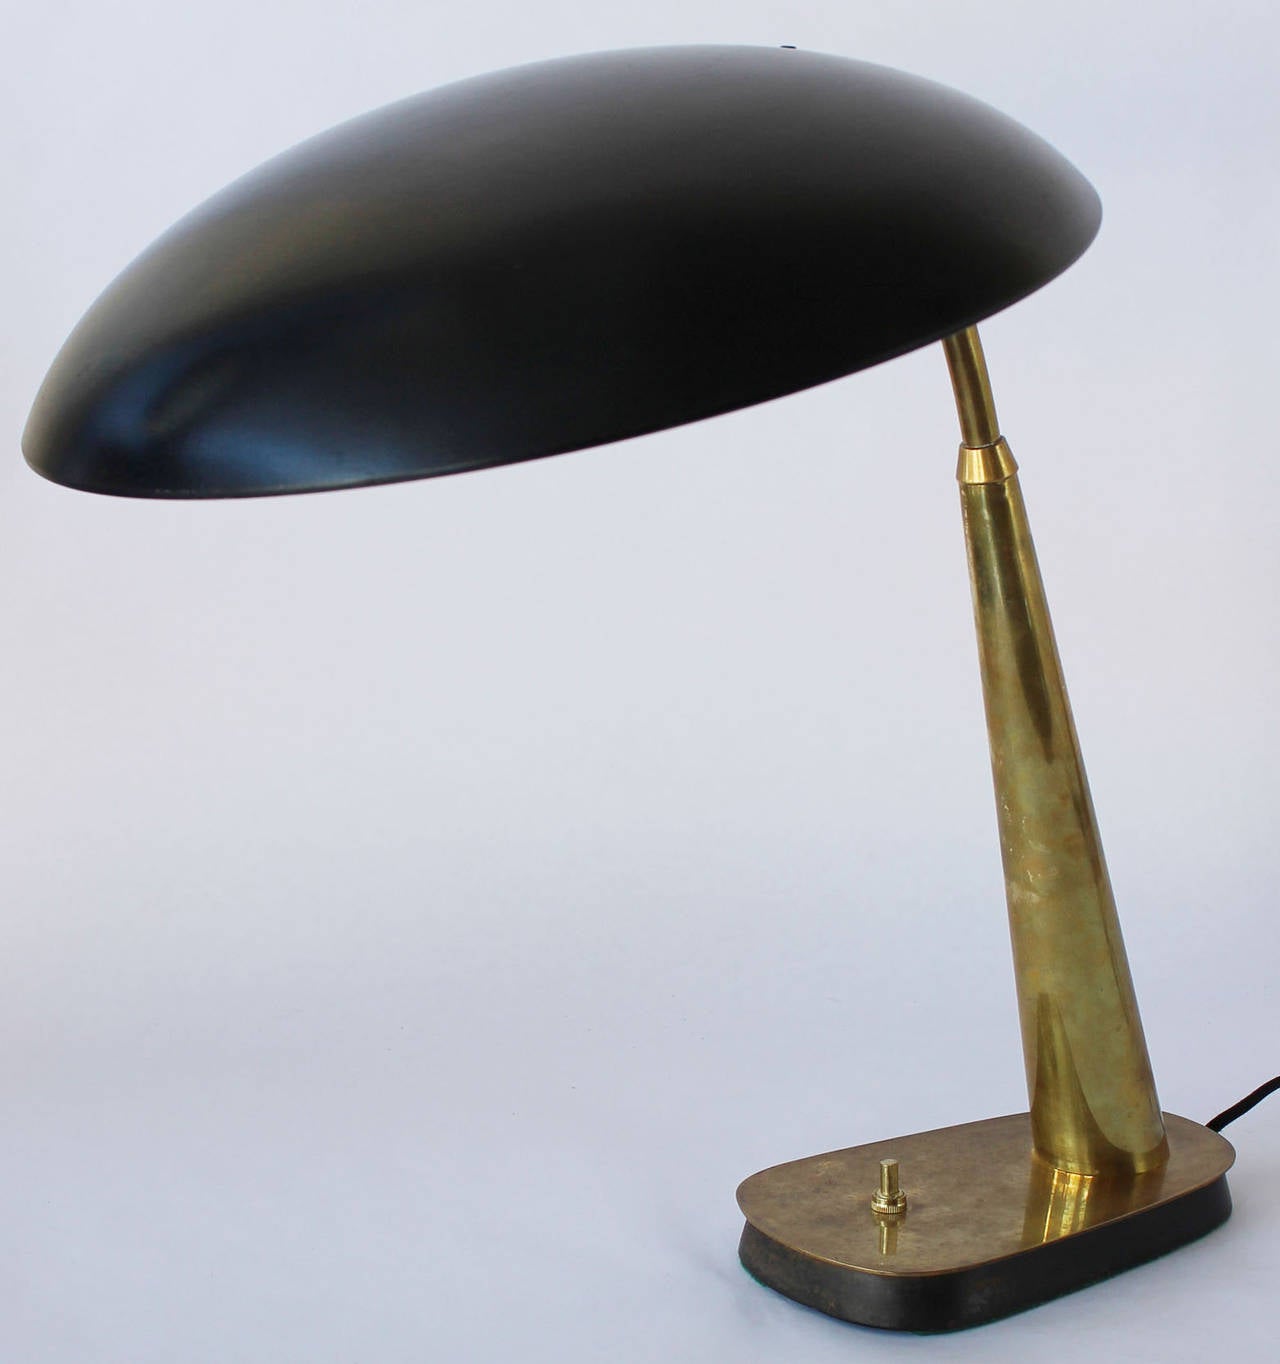 A handsome patinated brass and enameled metal desk or task lamp, wired and working.